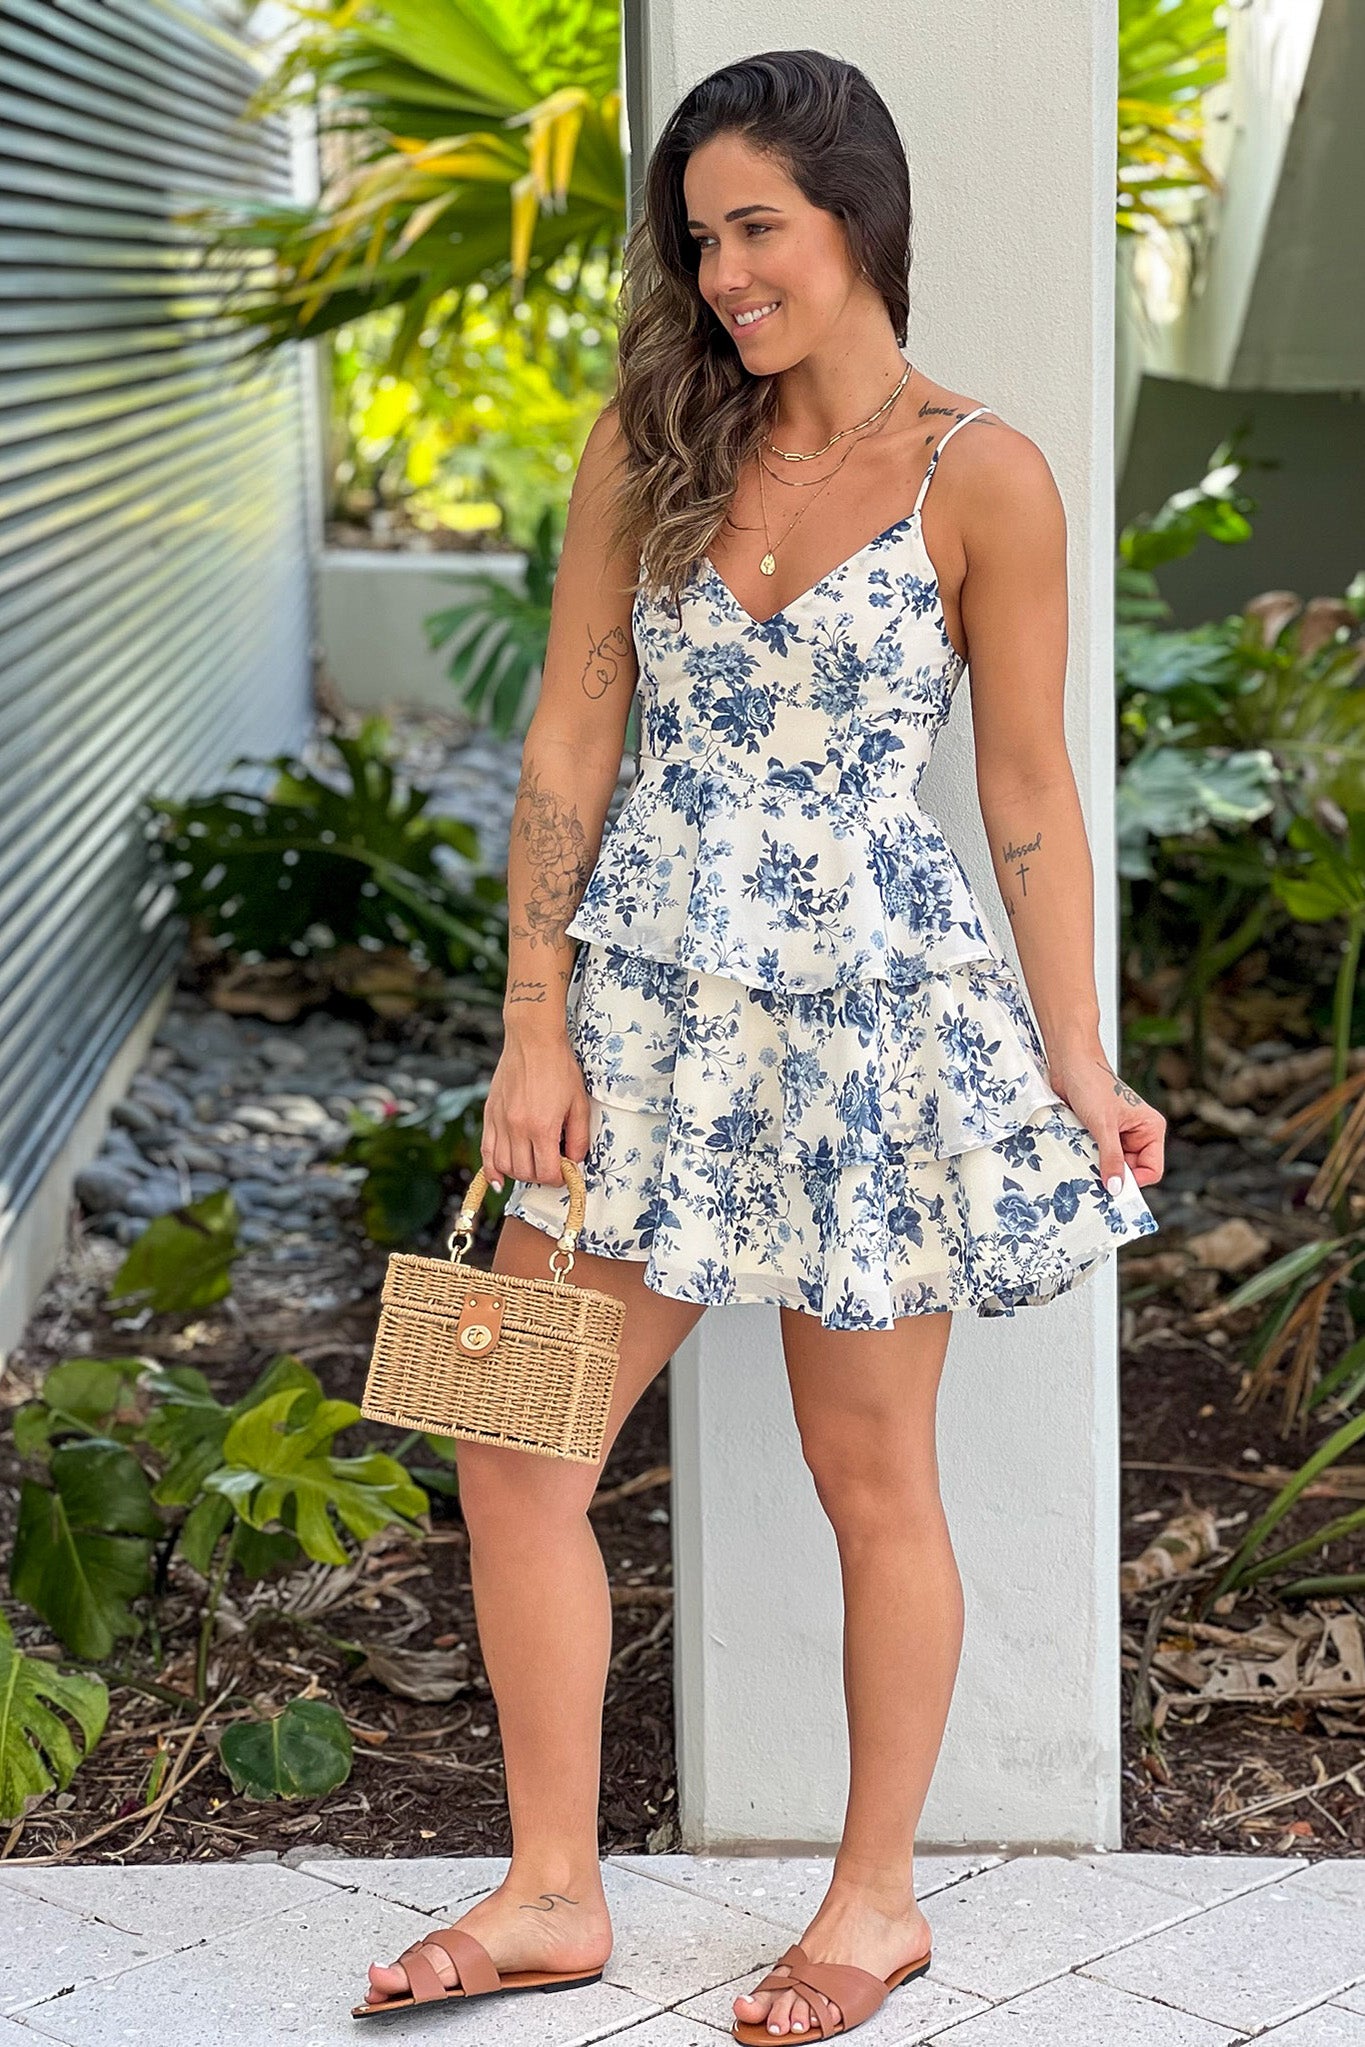 cream and blue floral summer dress